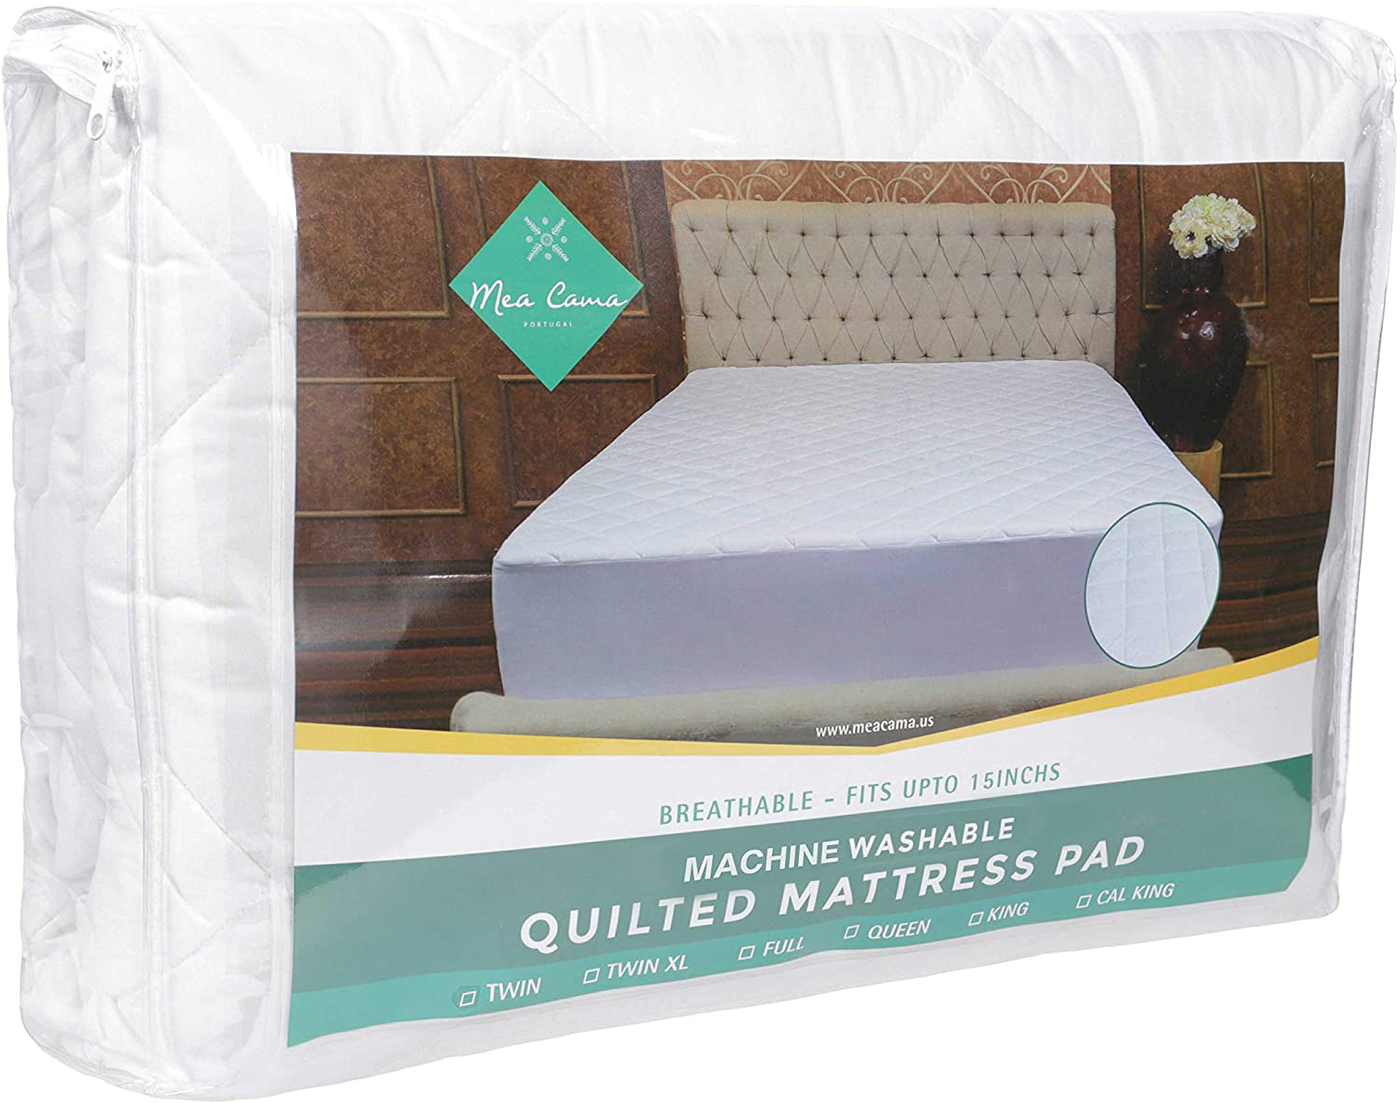 Mea Cama Quilted Mattress Topper Pad Fitted Cover - Fits 16 inch Deep Mattress (Twin)